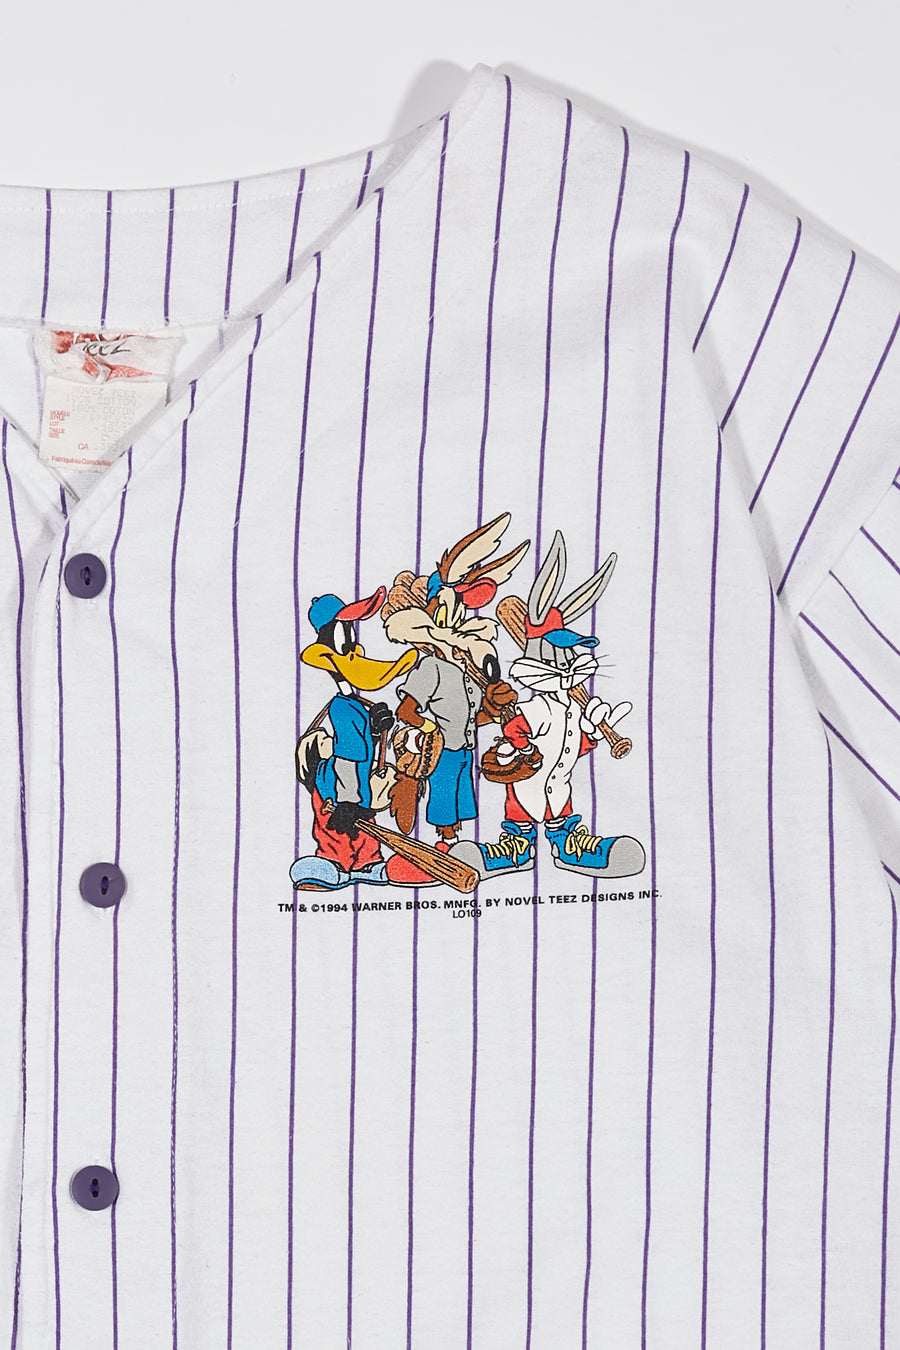 90's Warner Bros Looney Tunes Jersey By Novel Teez in a vintage style from thrift store Twise Studio